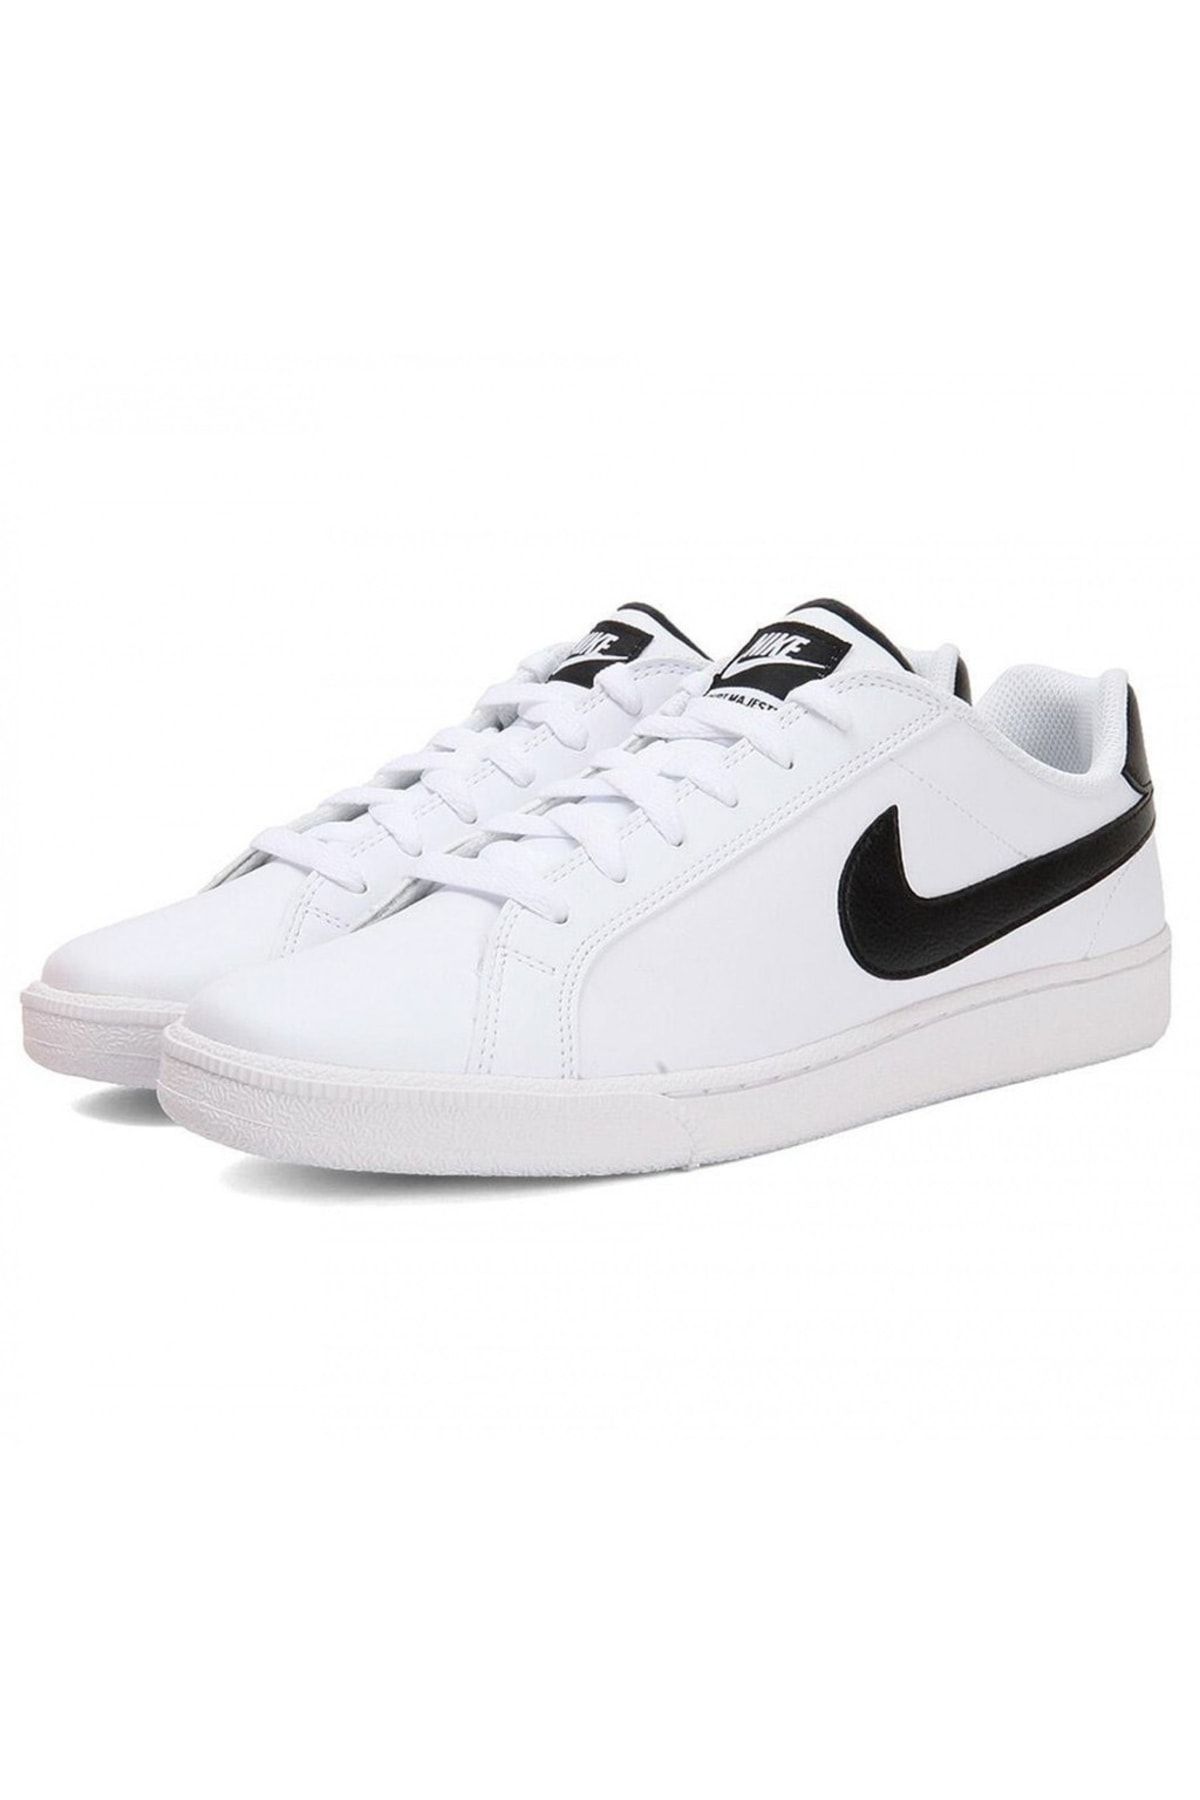 Nike Court Majestic Leather Sneakers/shoes 574236-100